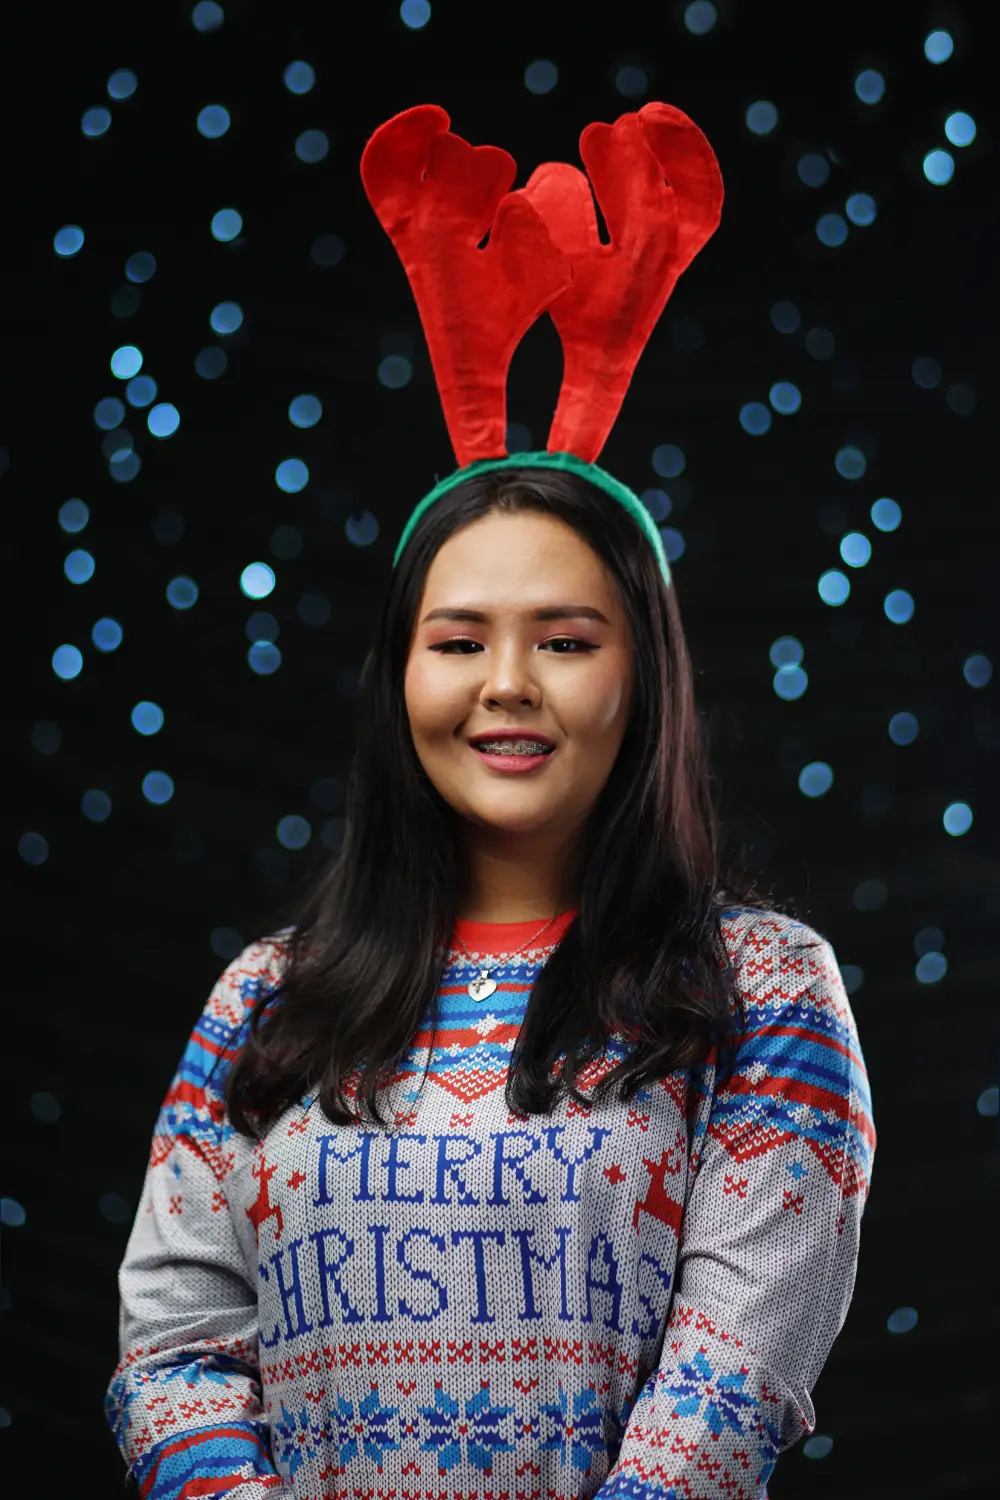 An employee wears an ugly Christmas Sweater with reindeer antlers for a virtual office holiday party